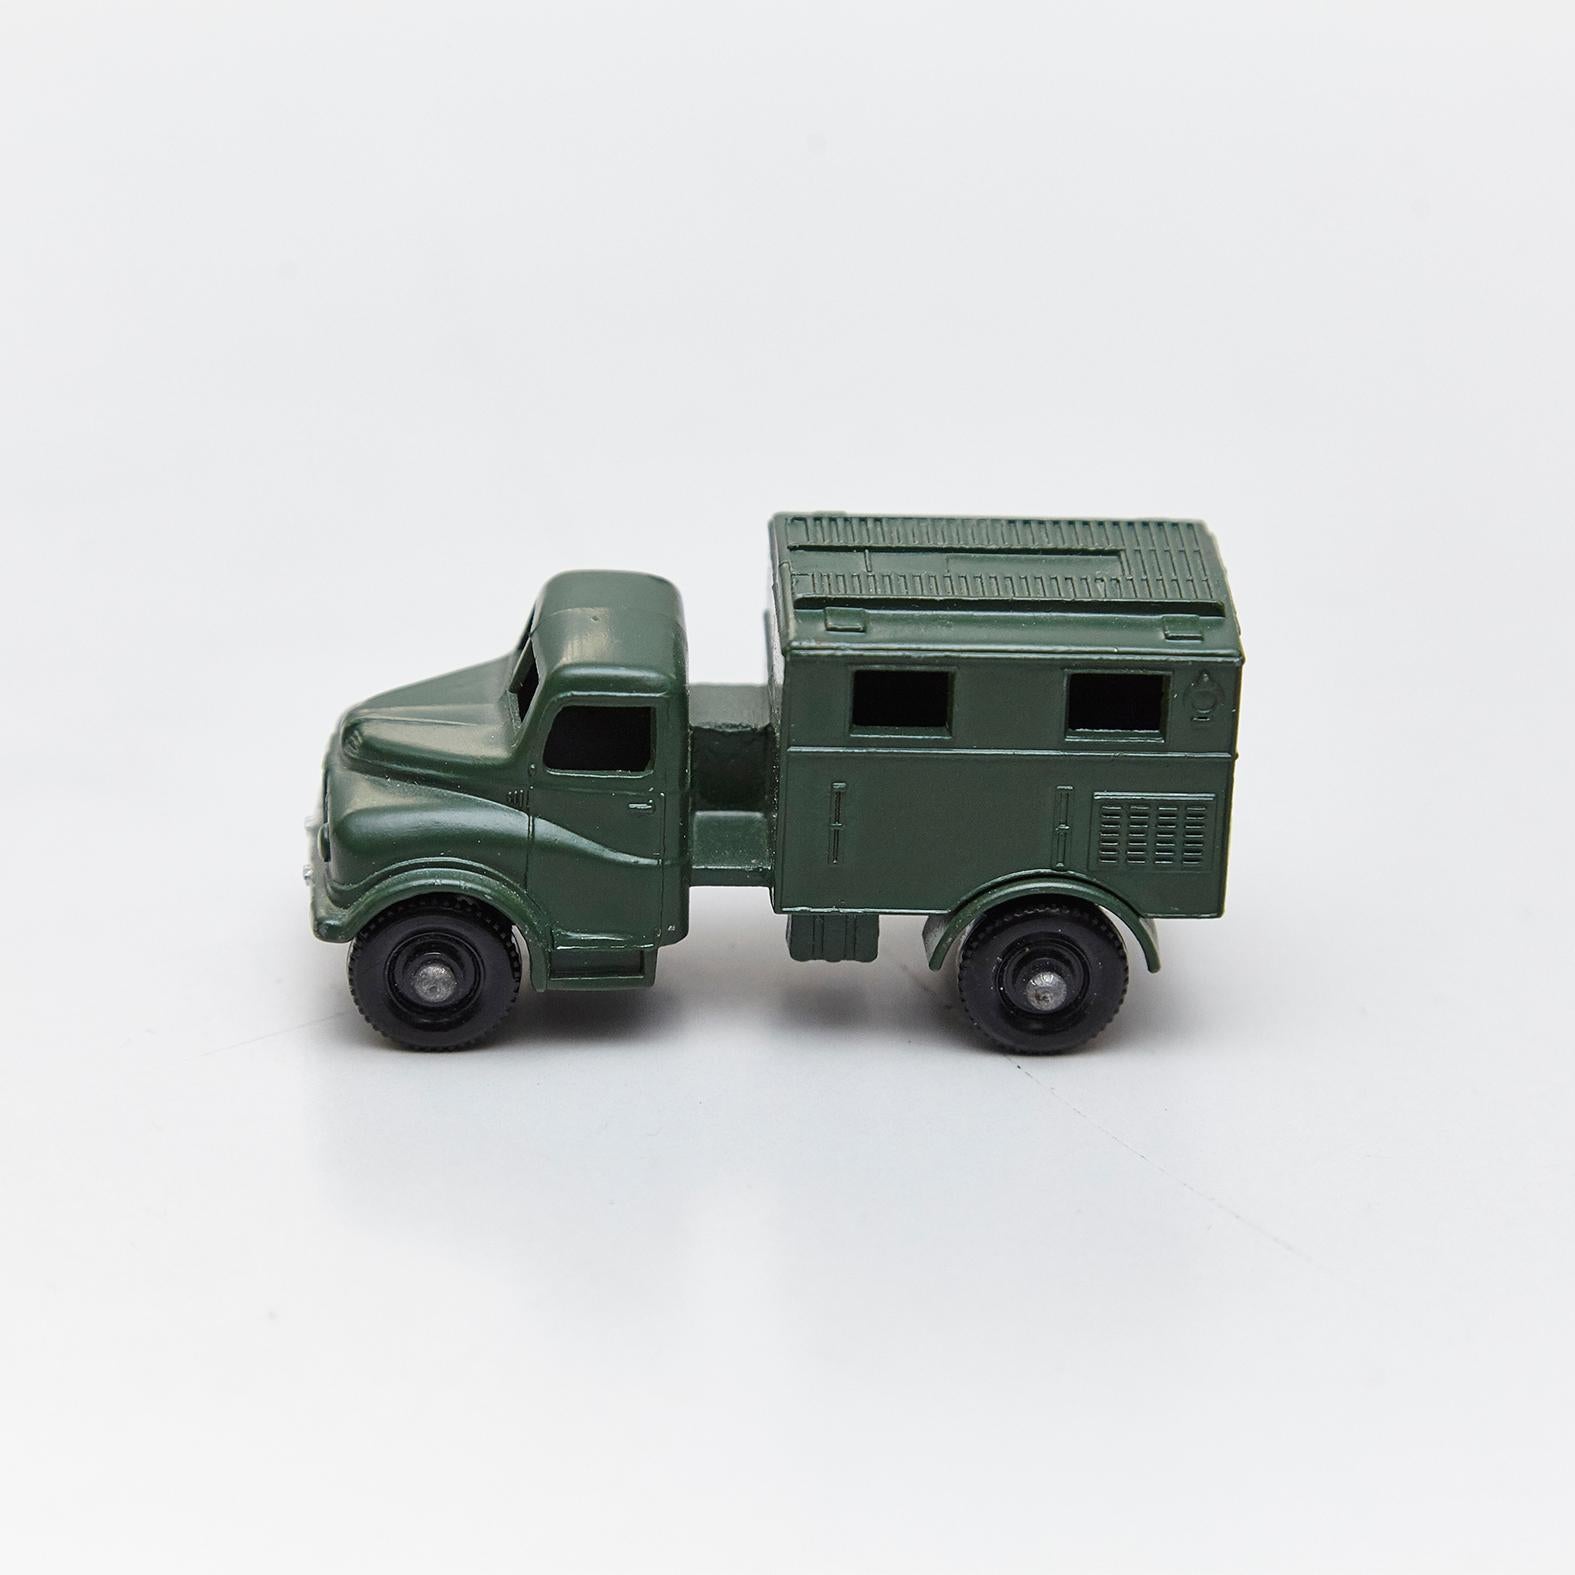 Lesney Matchboxes Series Antique Metal Toy Cars Green Military - Free Shipping 6